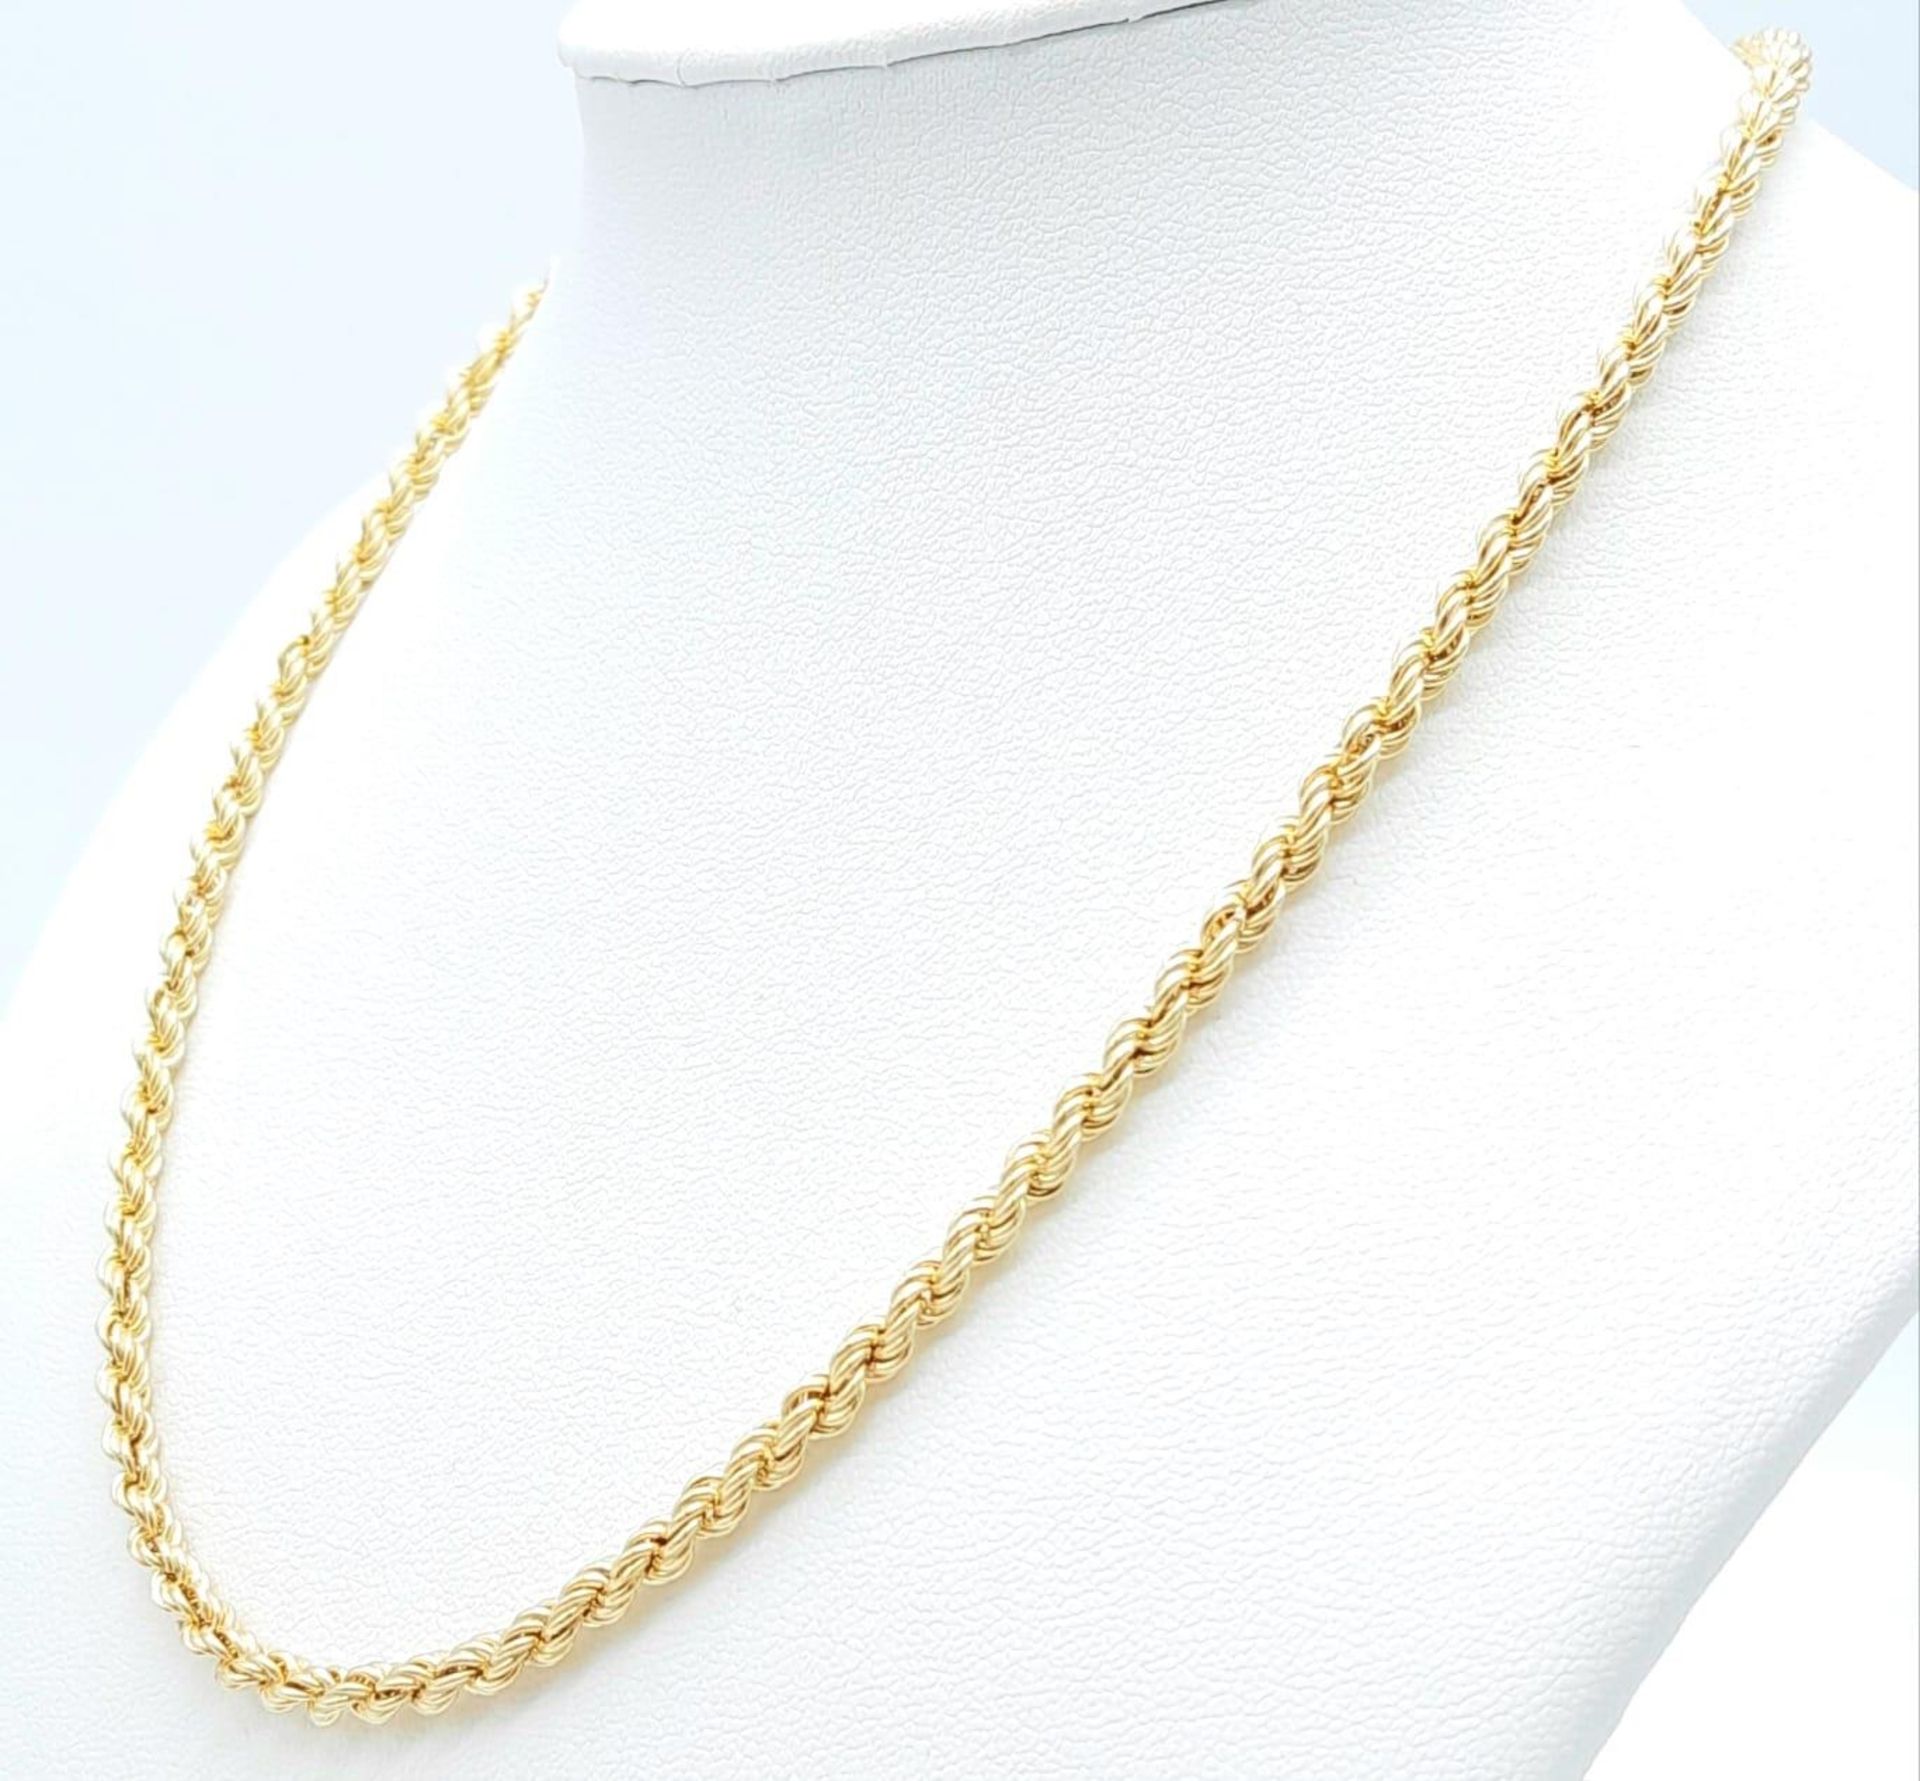 A 9K Yellow Gold Rope Necklace. 40cm length. 4.65g weight. - Image 3 of 5